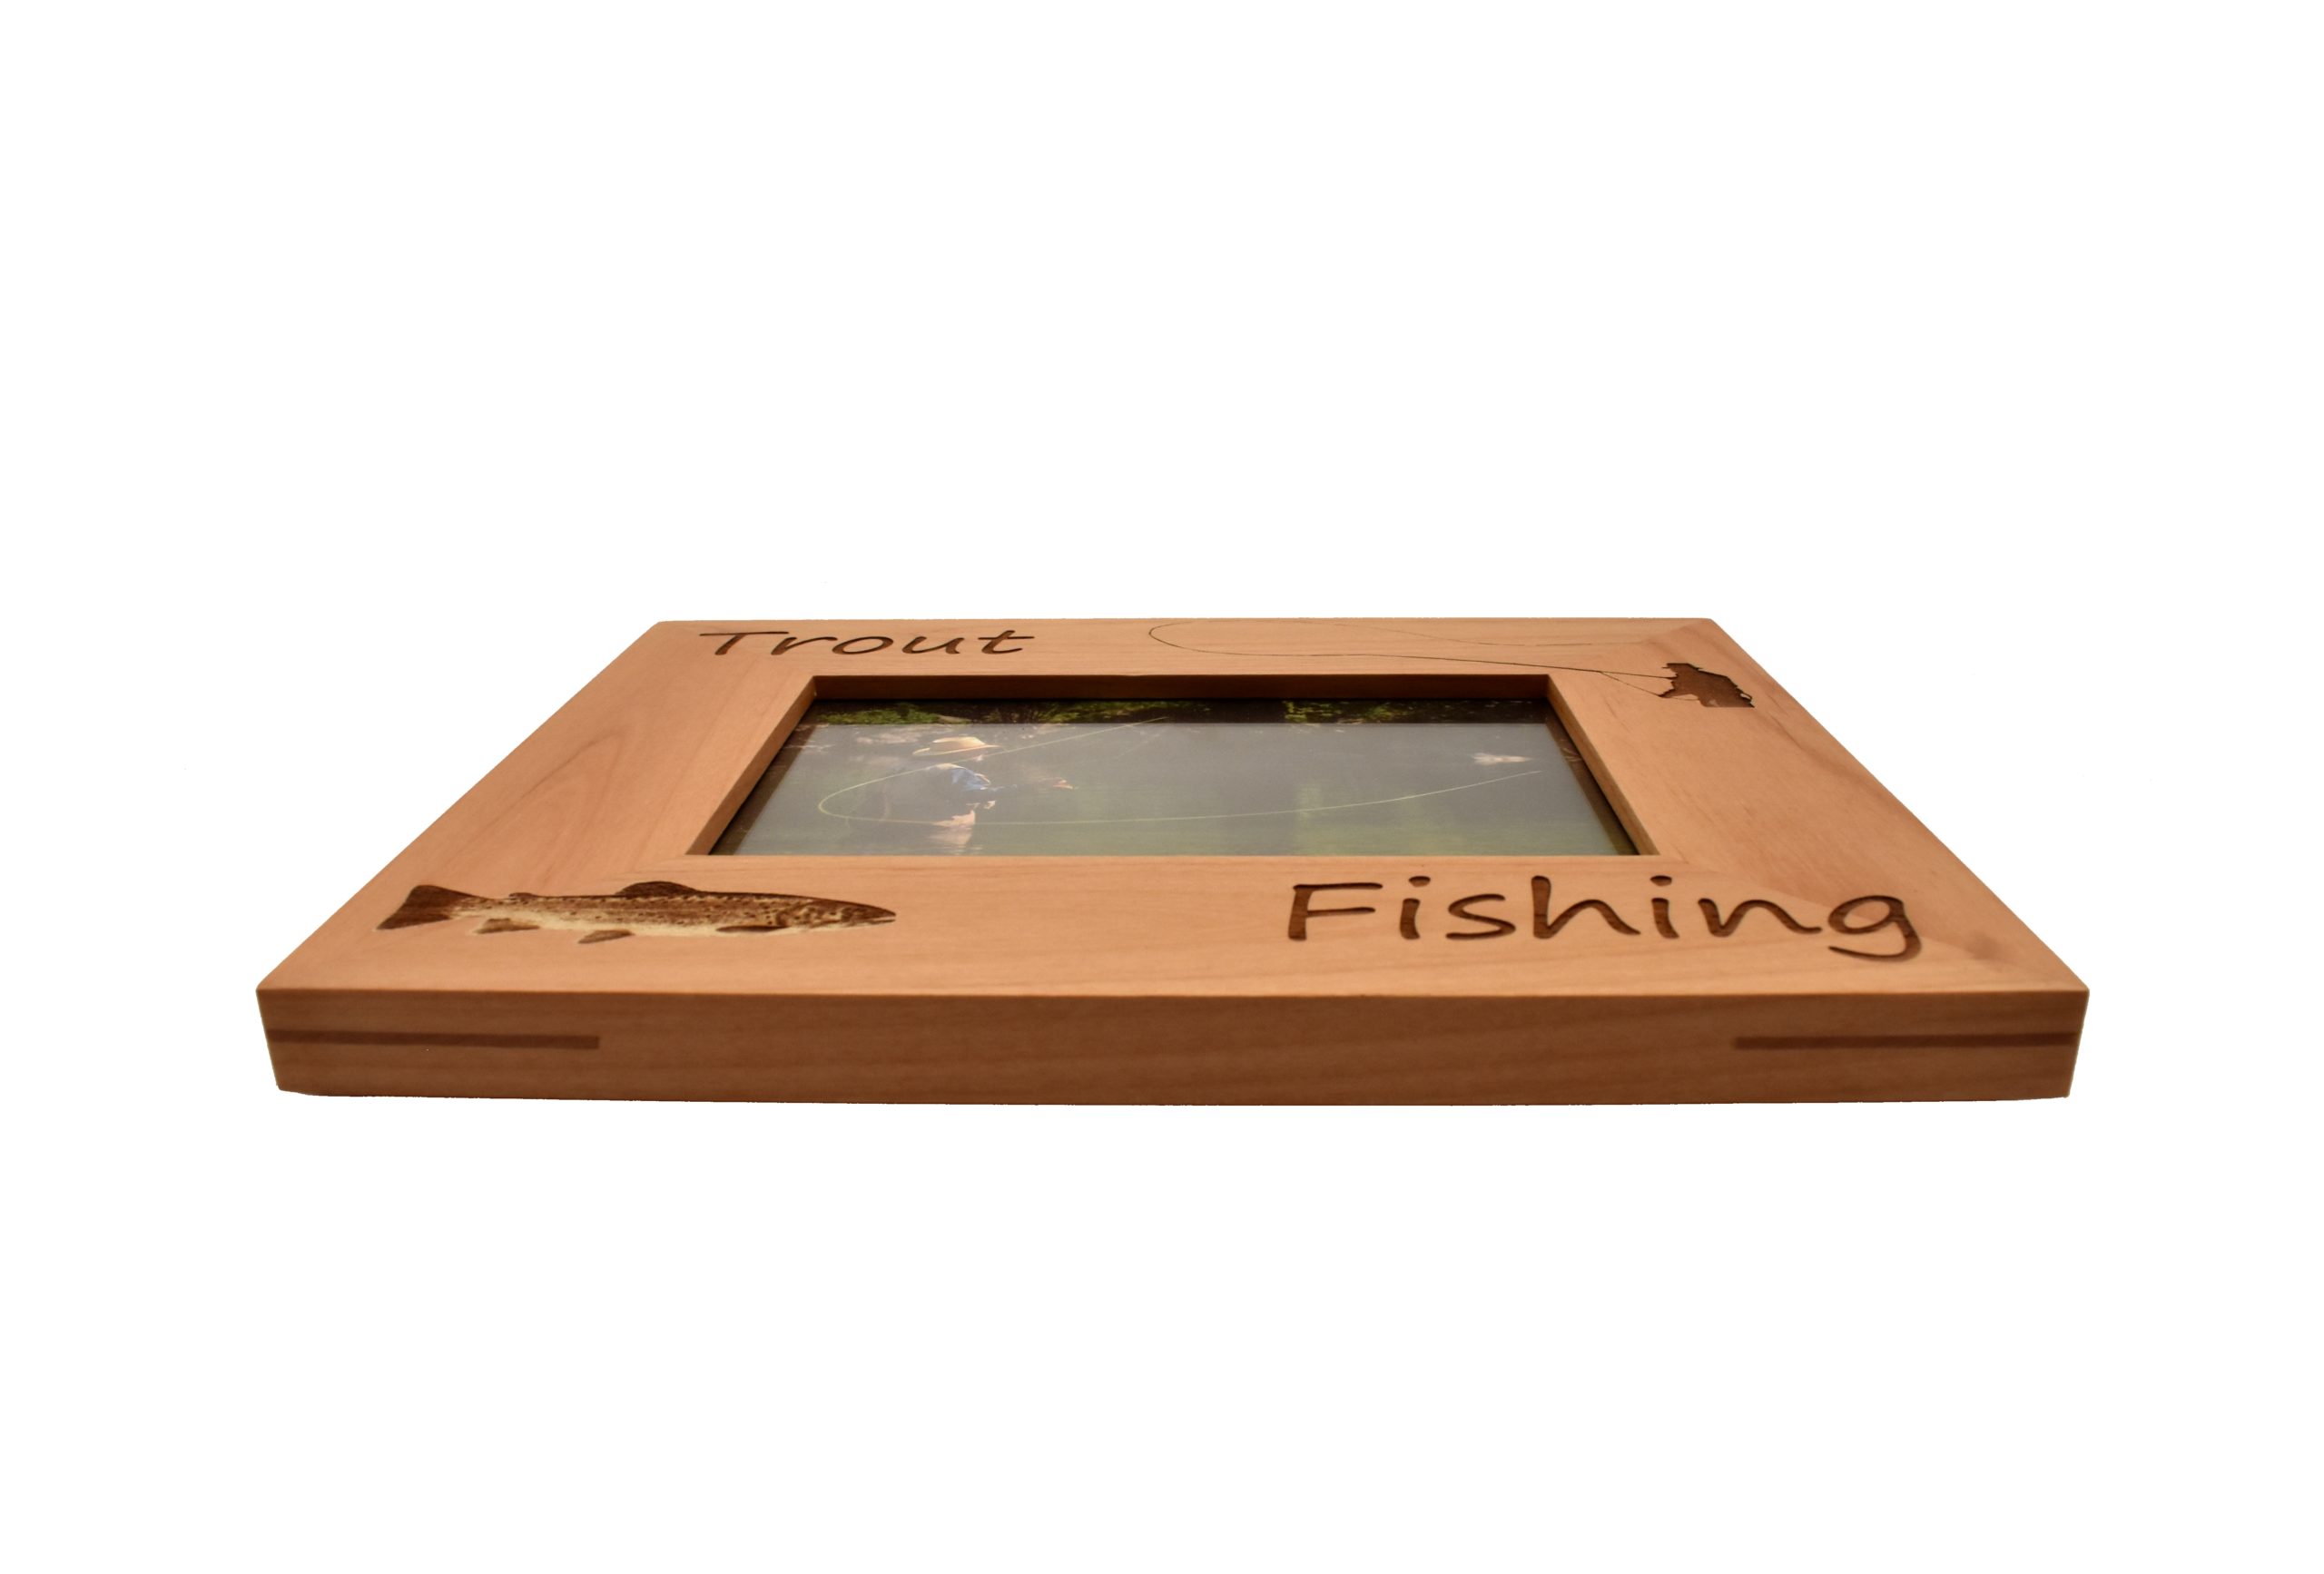 https://www.whitetailwc.com/wp-content/uploads/2019/09/Personalized-Picture-Frame-Trout-Fishing-4-scaled.jpg